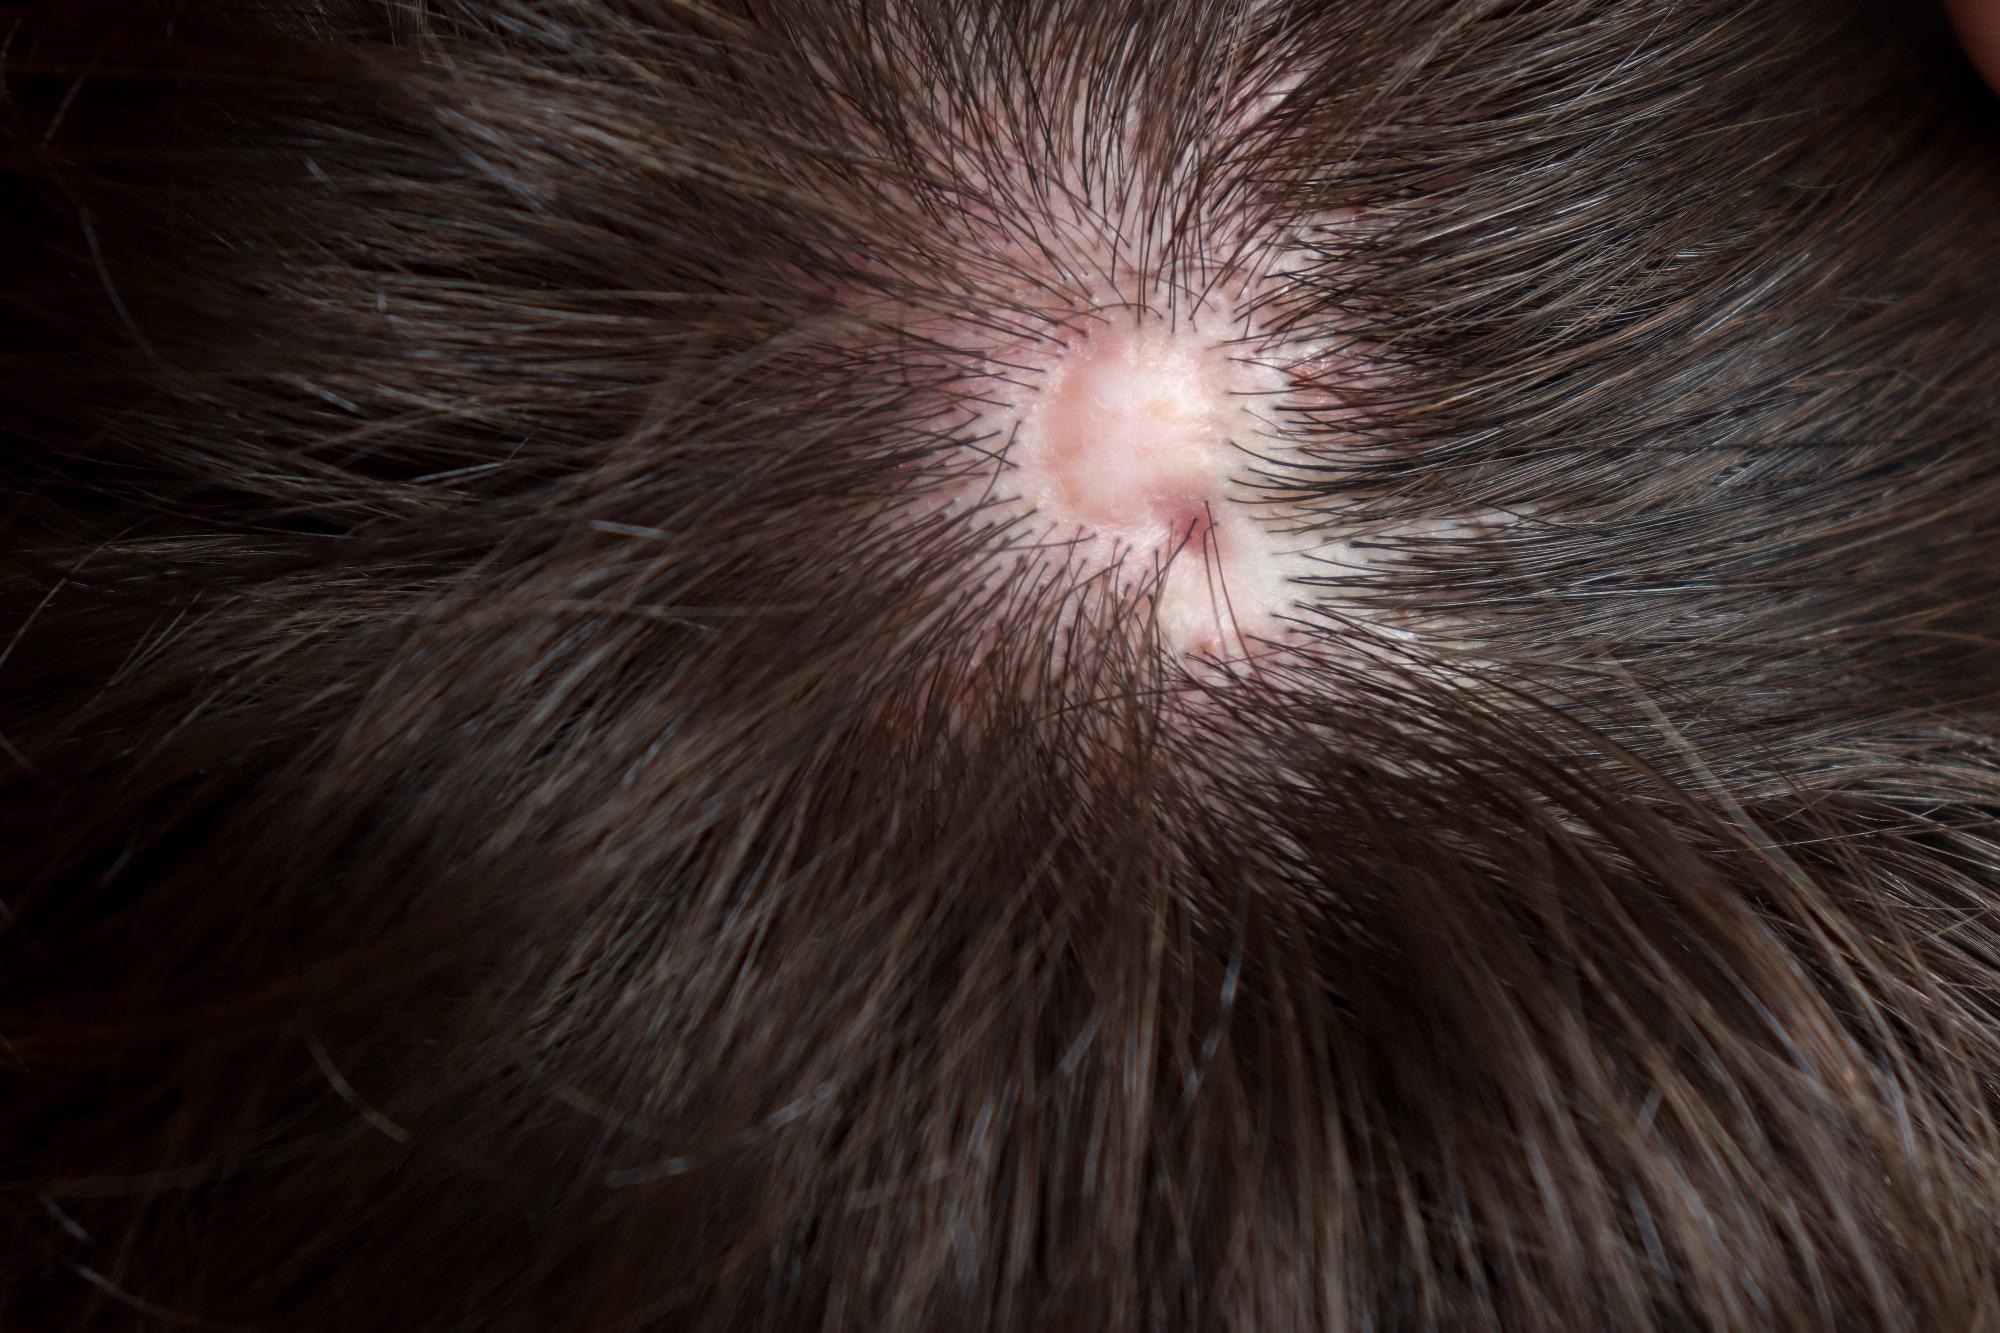 ​​​​​​​Nonsyndromic aplasia cutis congenita, a congenital defect with an absence of the epidermis, dermis and sometimes subcutaneous tissues. Usually on the top of the head. Image Credit: Kari Ahlers / Shutterstock